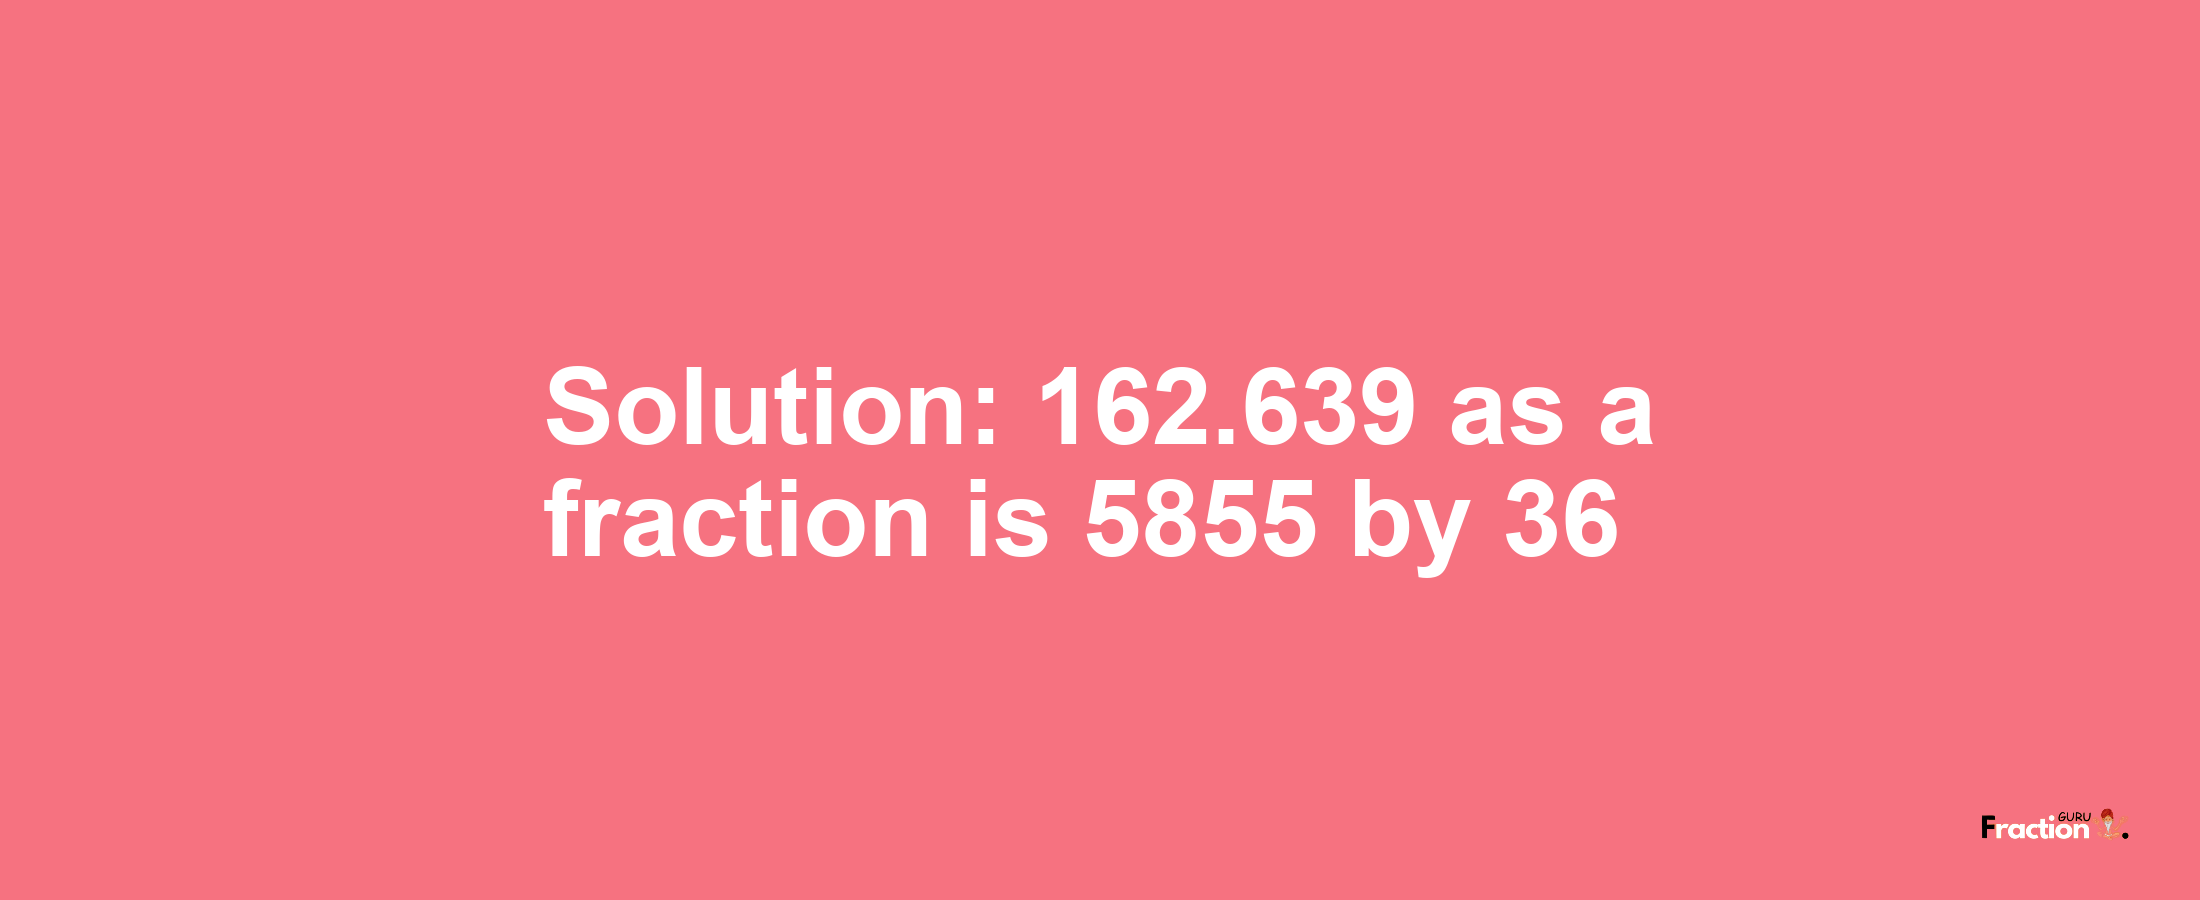 Solution:162.639 as a fraction is 5855/36